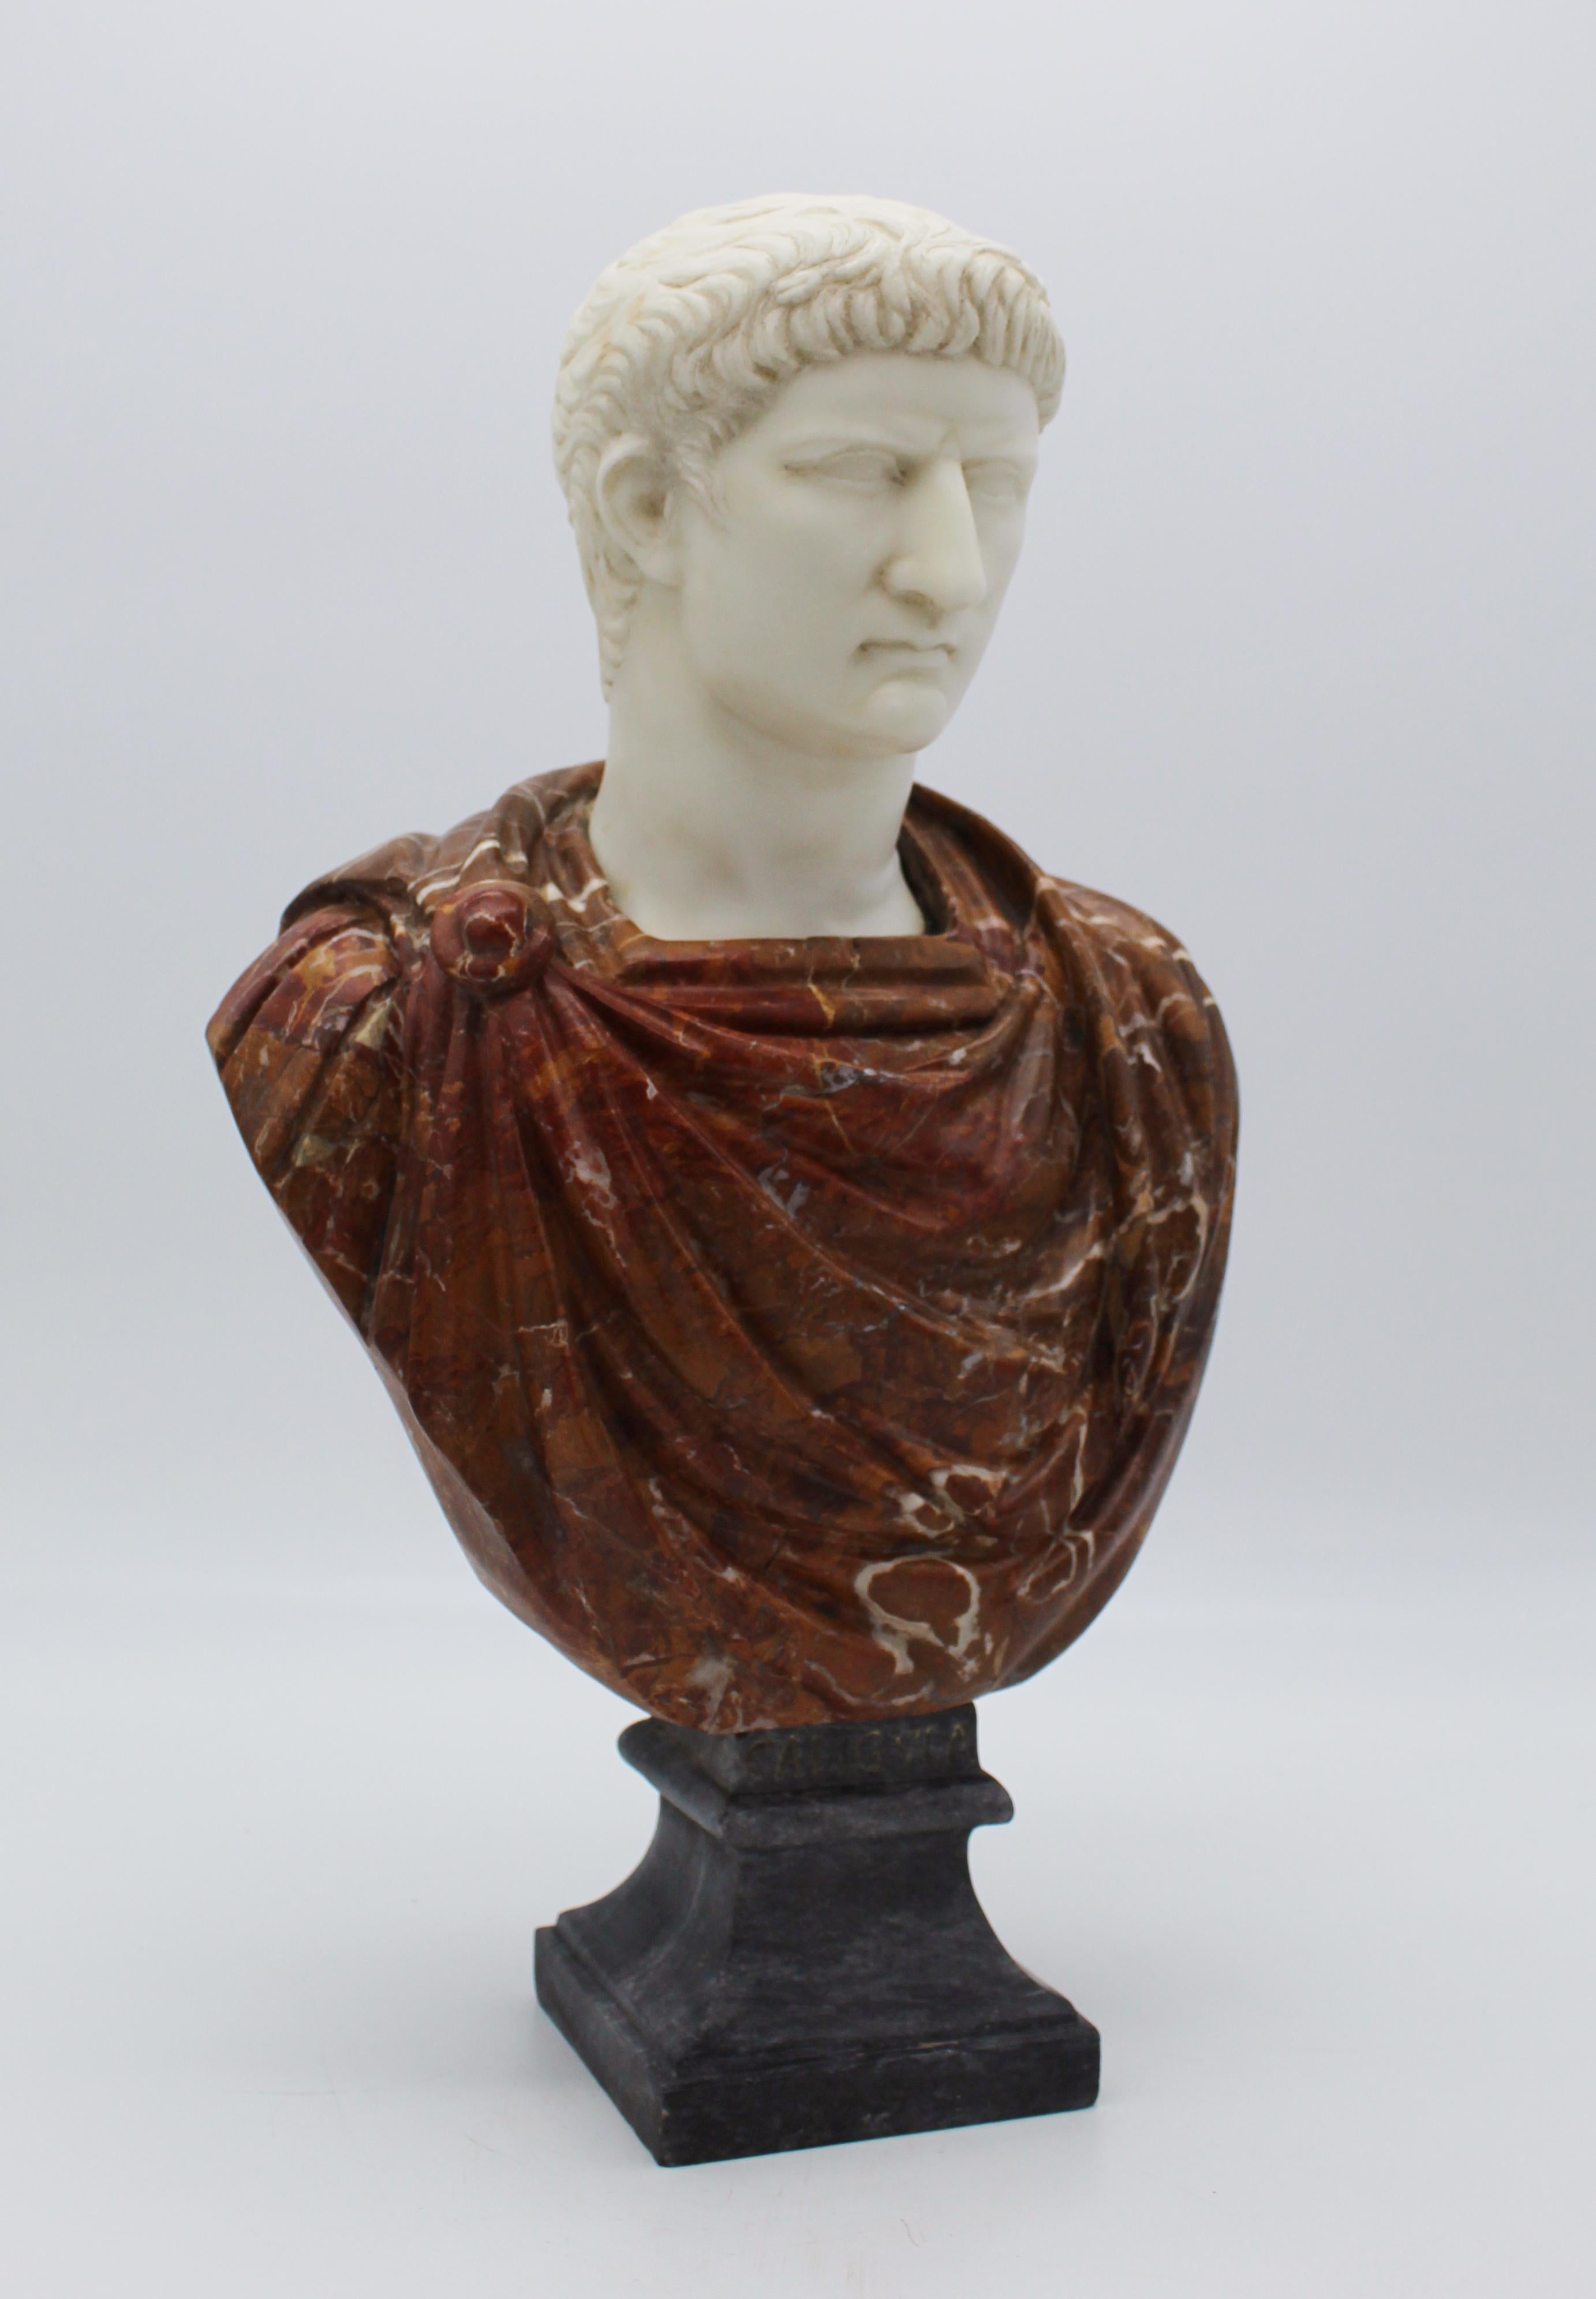 20th Century Italian Marble Sculpture Bust of Emperor Caligula By G.Pace 3